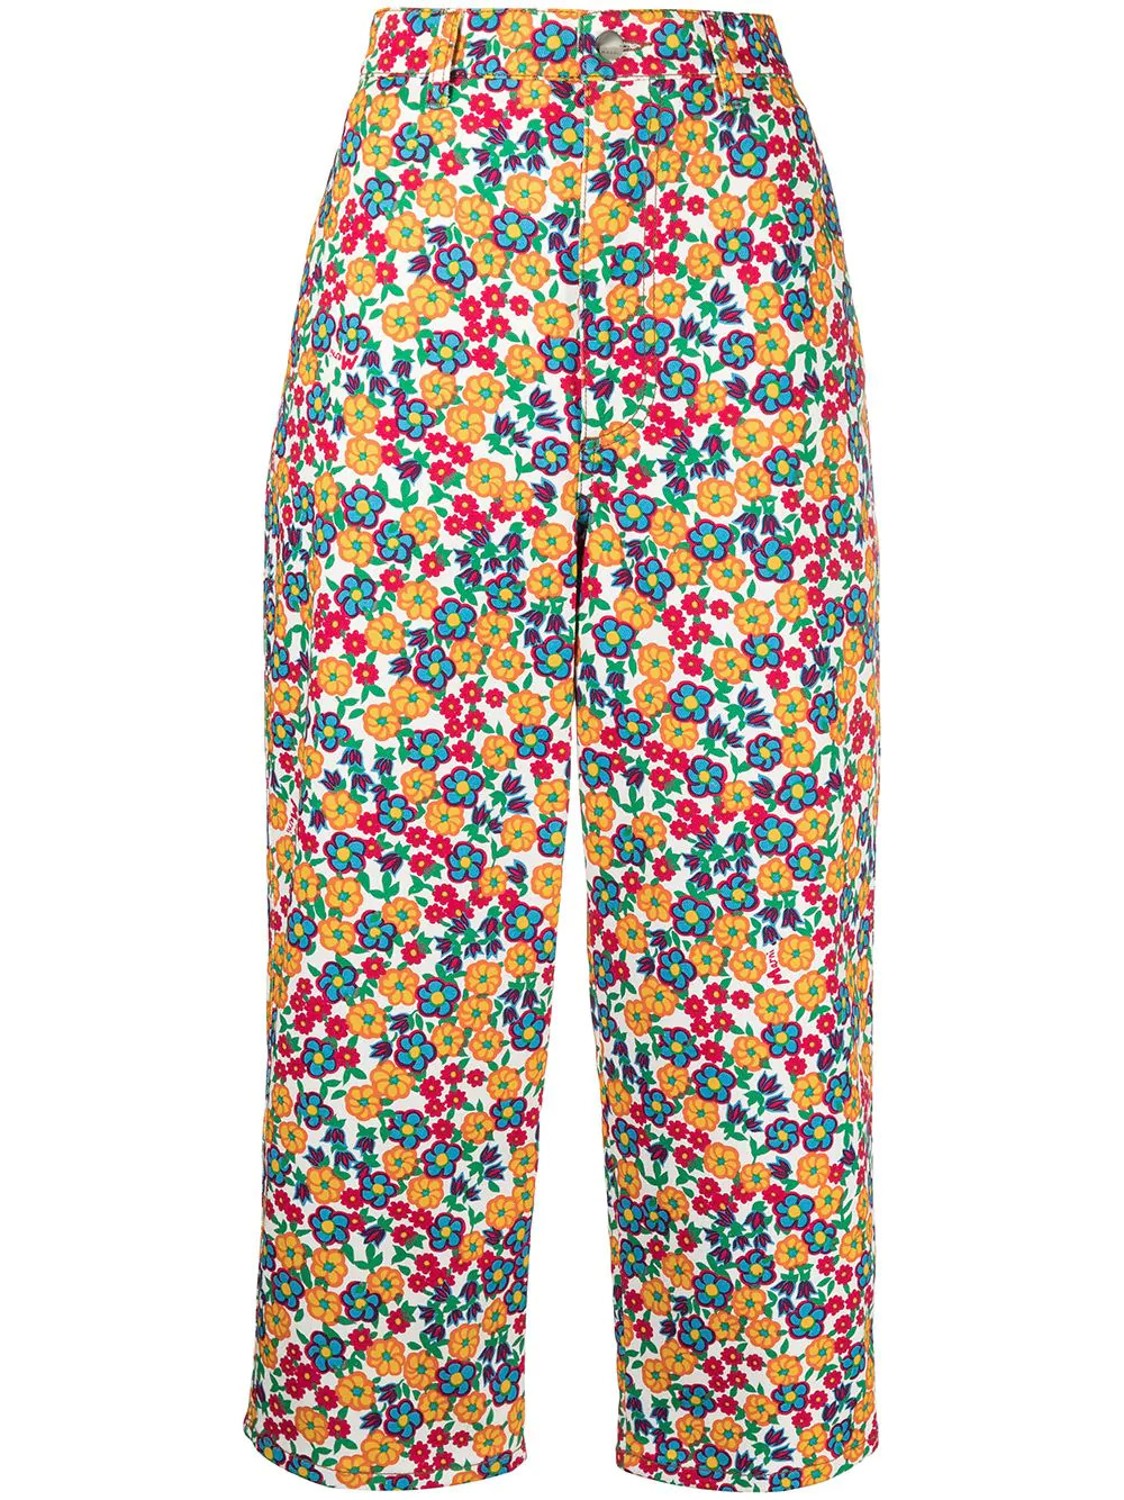 shop Marni  Pants: Pants Marni, in jeans fabric, Pop Garden fabric, high waist, loose fit, front and back pockets, front closure with zip and button, length at the ankle.

Composition: 100% cotton. number 2003